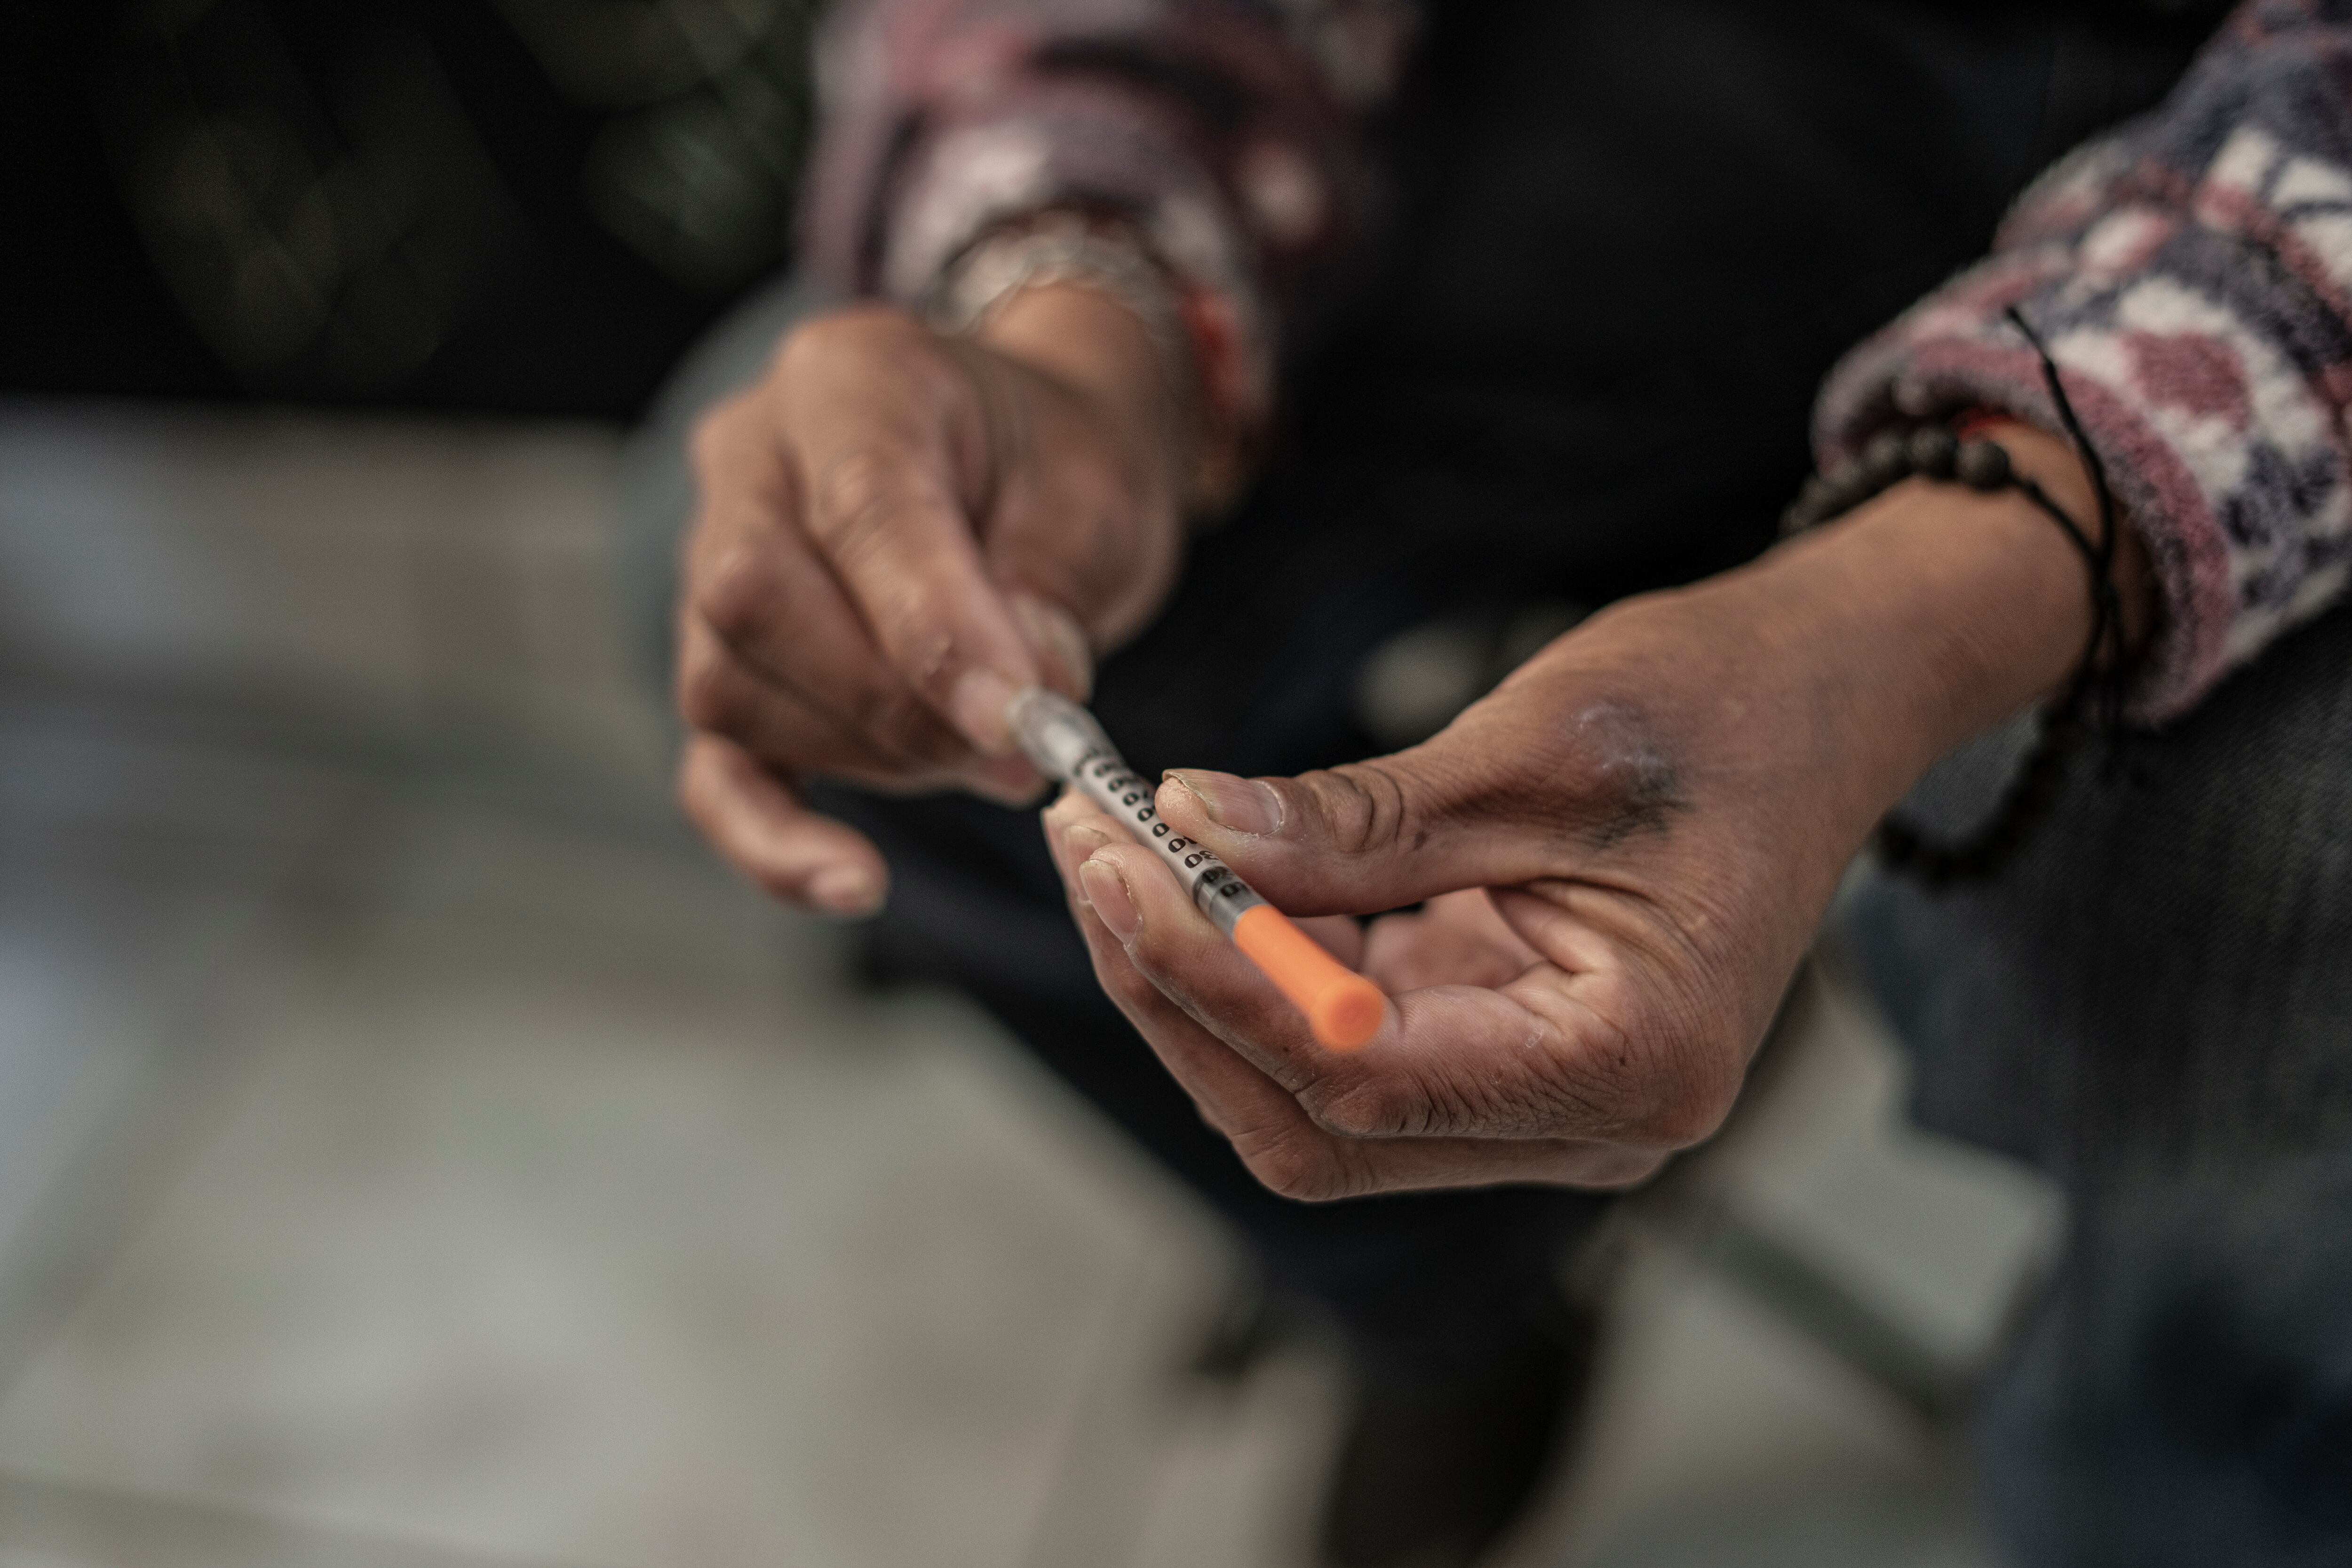 A woman shows a syringe used to inject fentanyl, in Tijuana (State of Baja California), in May 2023.